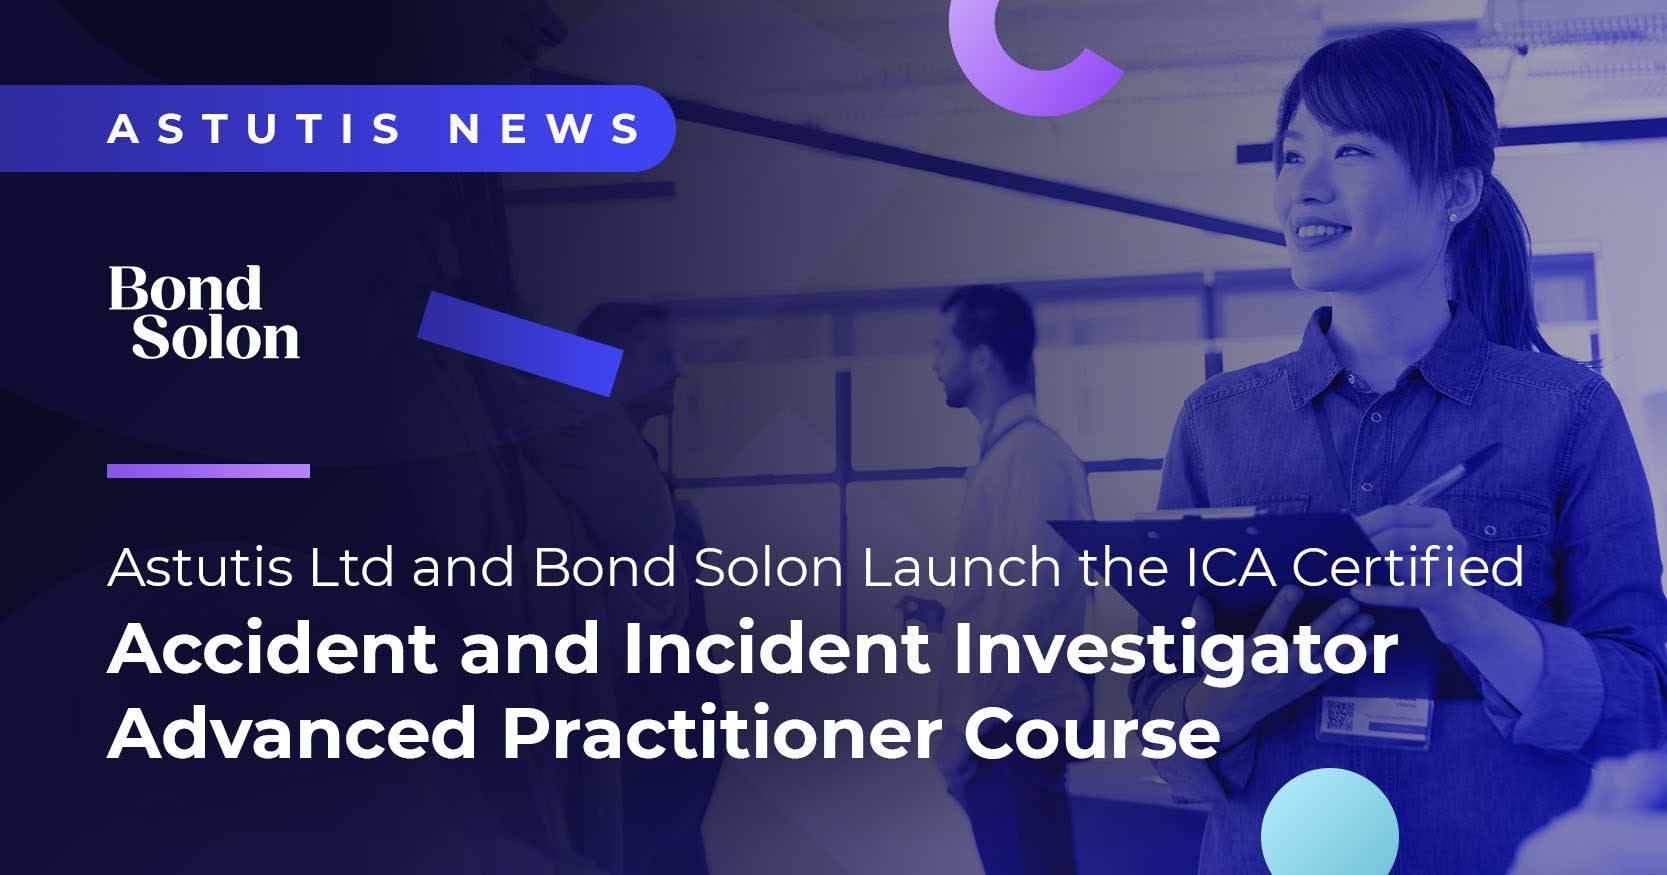 Astutis Ltd and Bond Solon Launch the ICA Certified Accident and Incident Investigator Advanced Practitioner Course Image